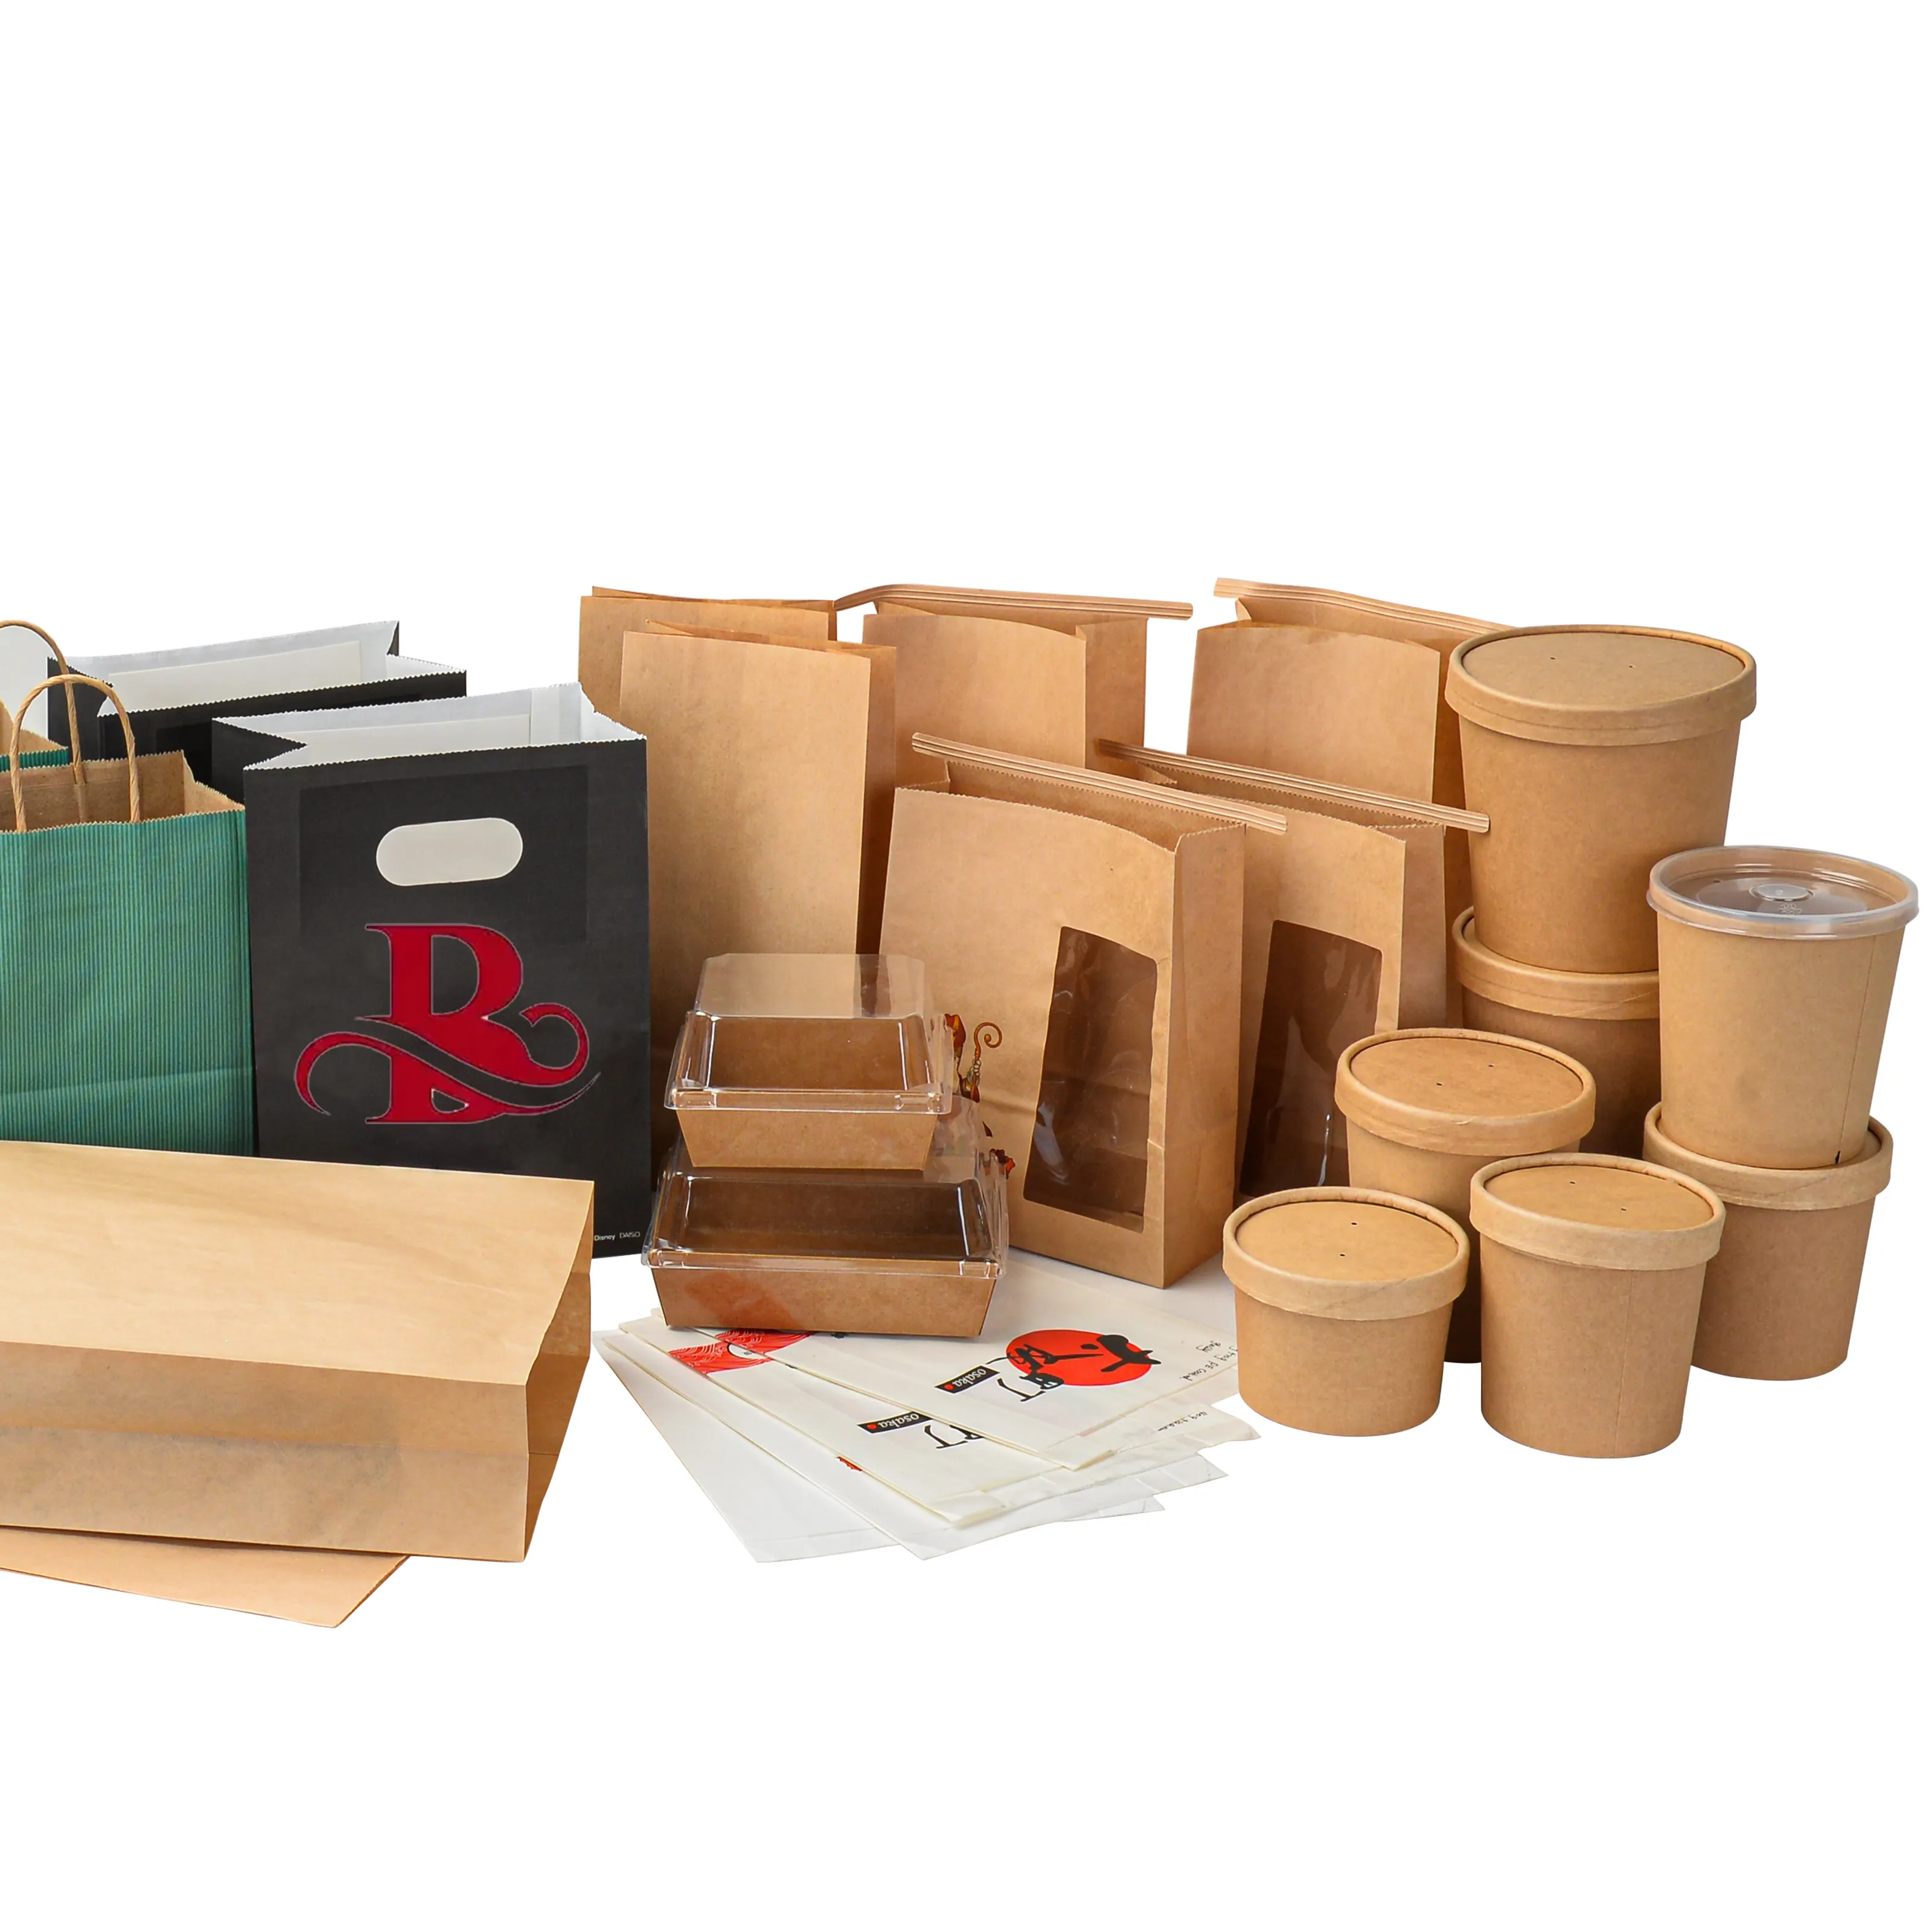 Restaurant compostable biodegradable takeaway take out box disposable containers kraft brown paper takeout fast food packaging